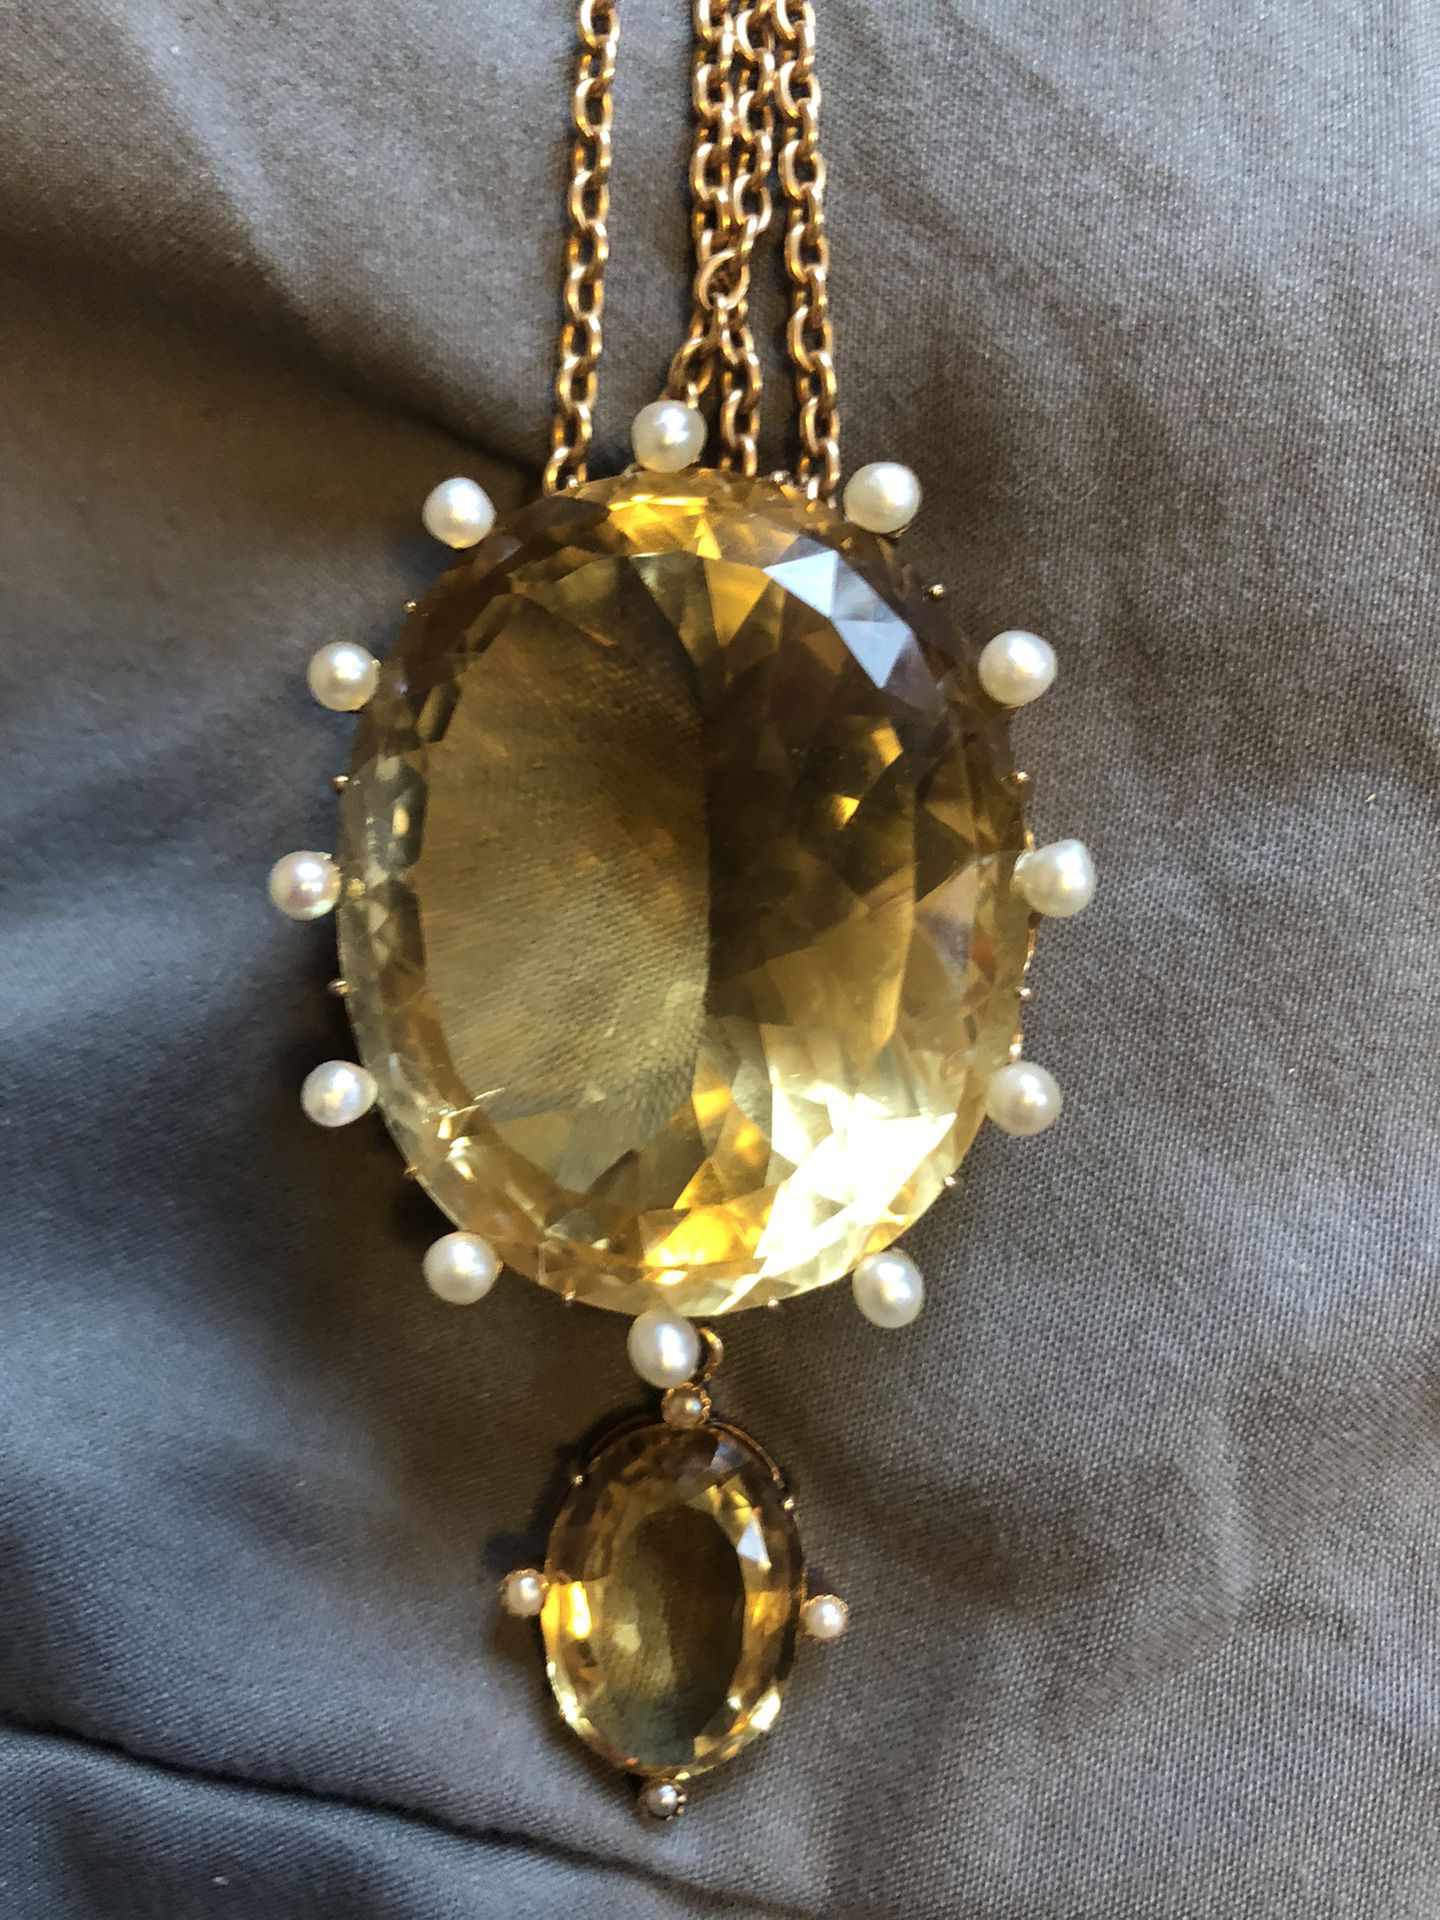 beautiful Victorian Citrine pendant and ring set